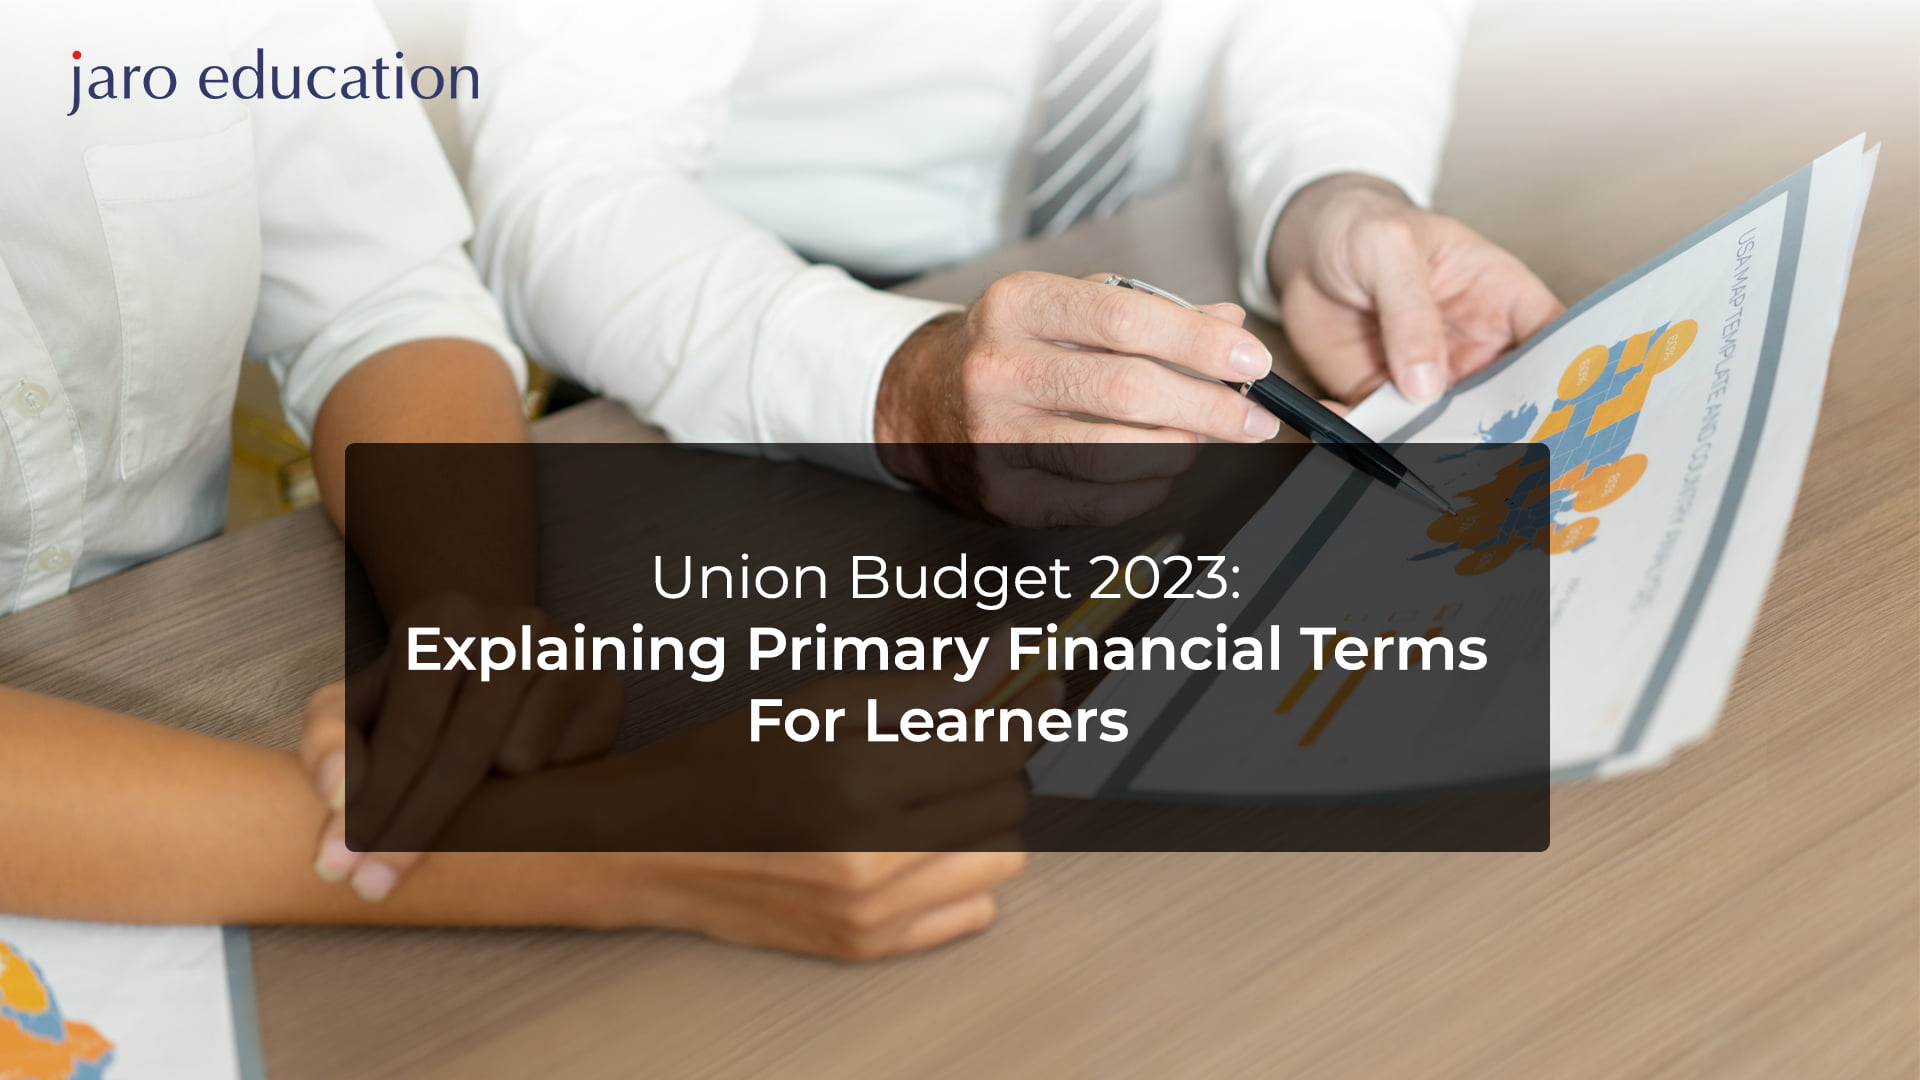 Union Budget 2023 Explaining Primary Financial Terms For Learners jaro